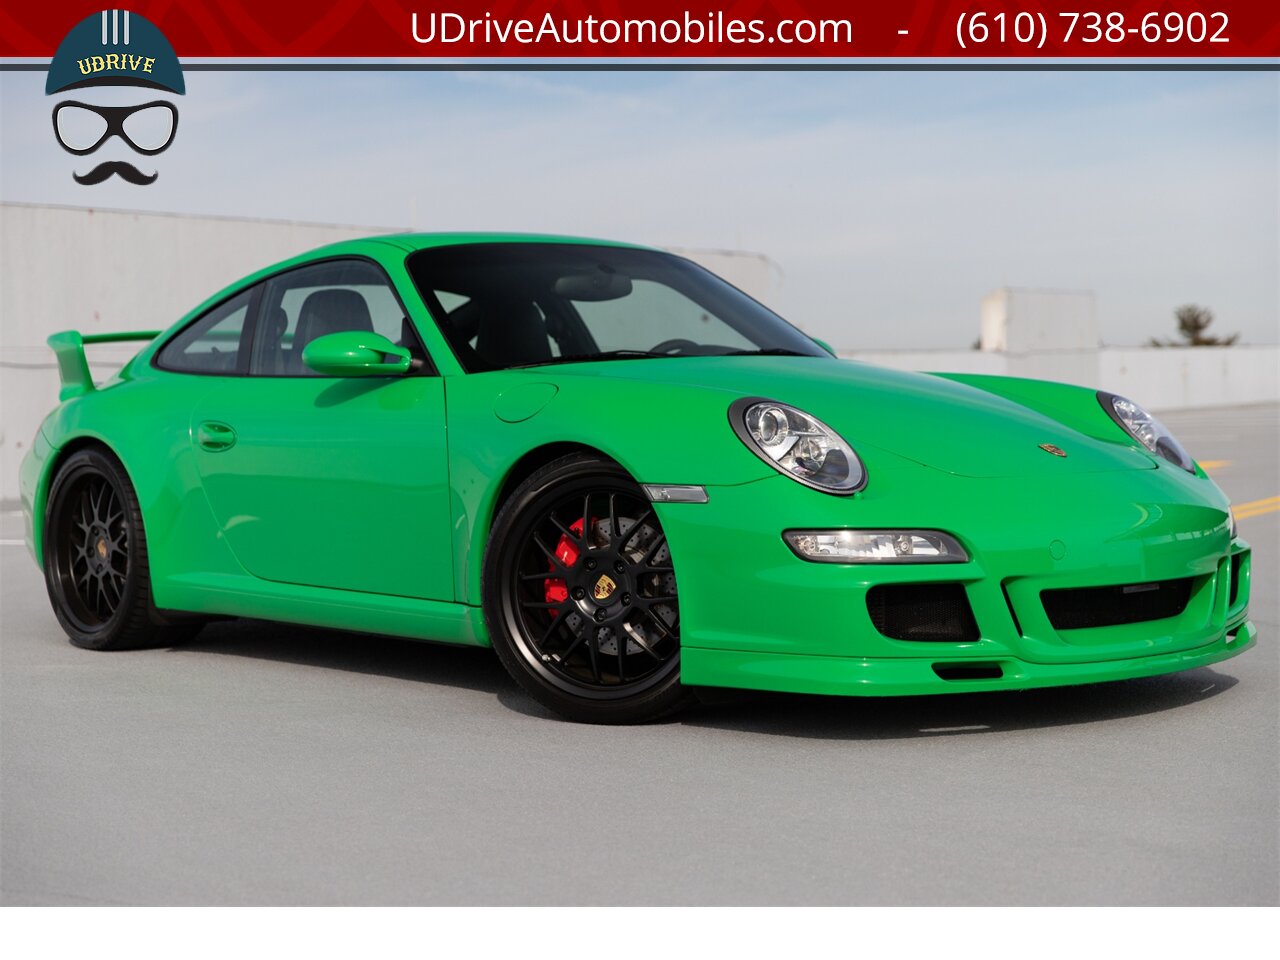 2008 Porsche 911 S 997 6Sp PTS RS Green AeroKit 1of a Kind  $118k MSRP Champion F77 Pkg RG5 Whls - Photo 4 - West Chester, PA 19382